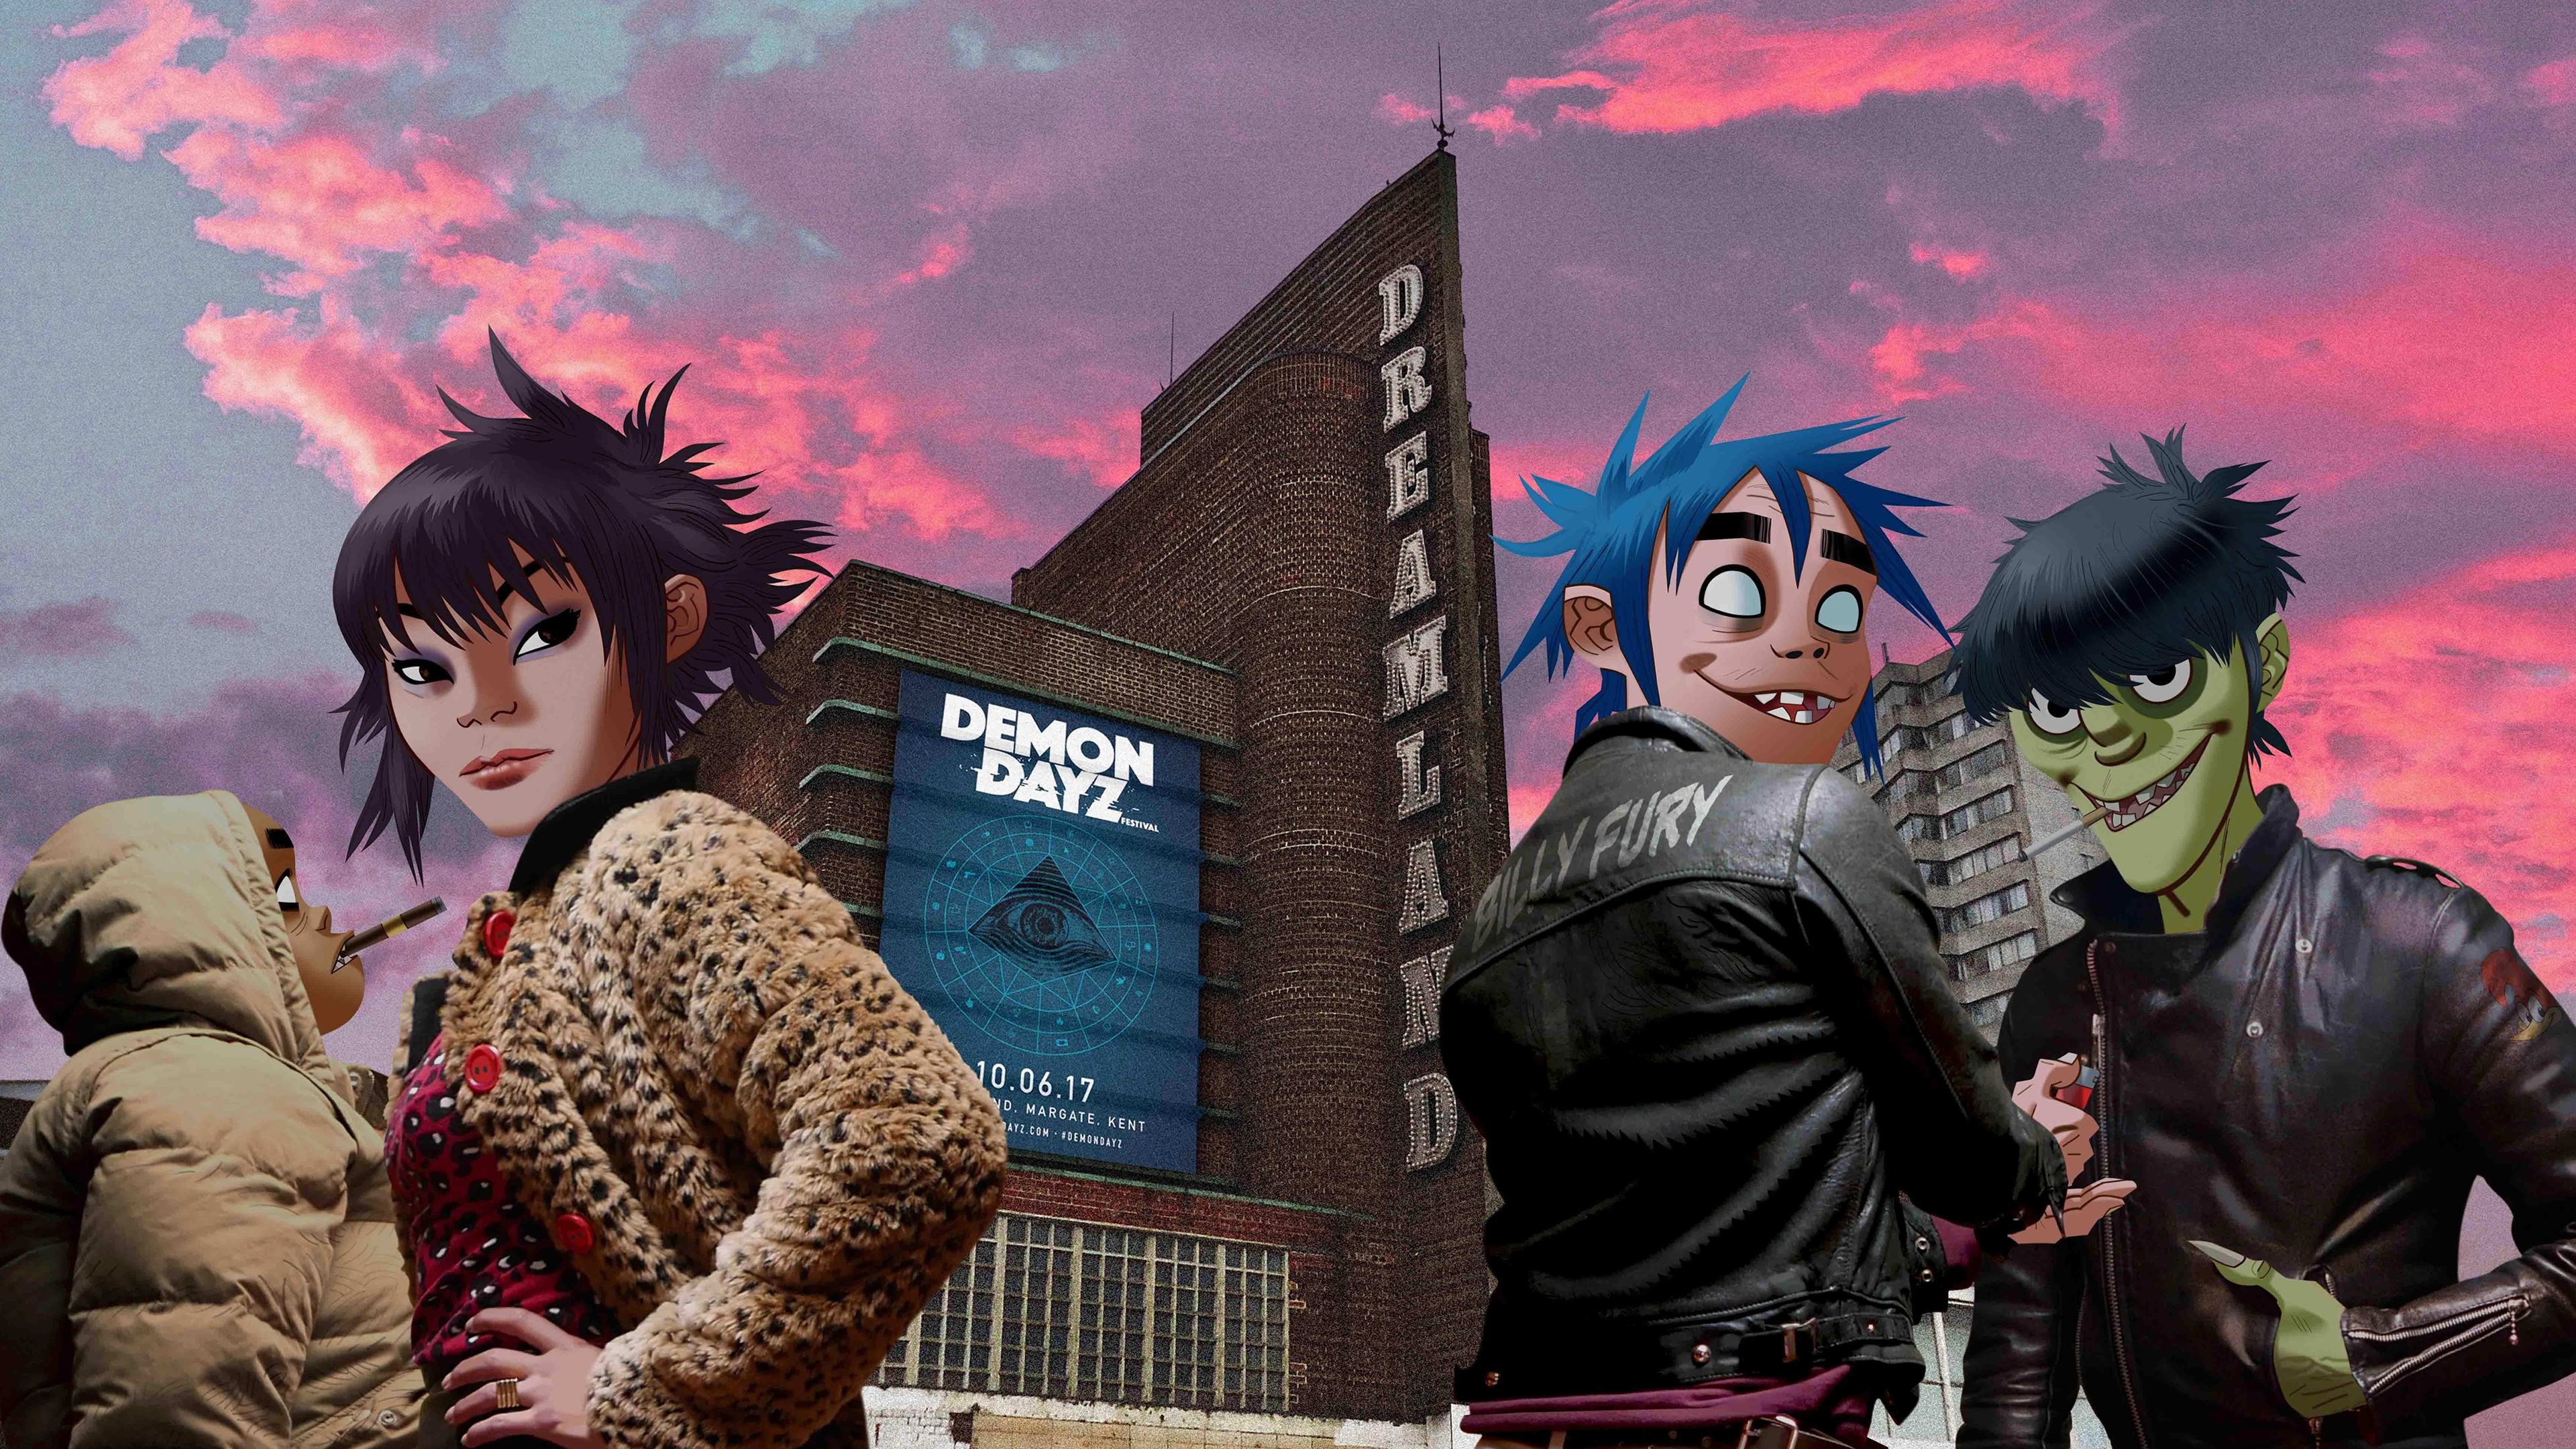 Gorillaz: Humanz, The fifth studio album by the British virtual band, Two decades of the animated electronic career. 3840x2160 4K Wallpaper.